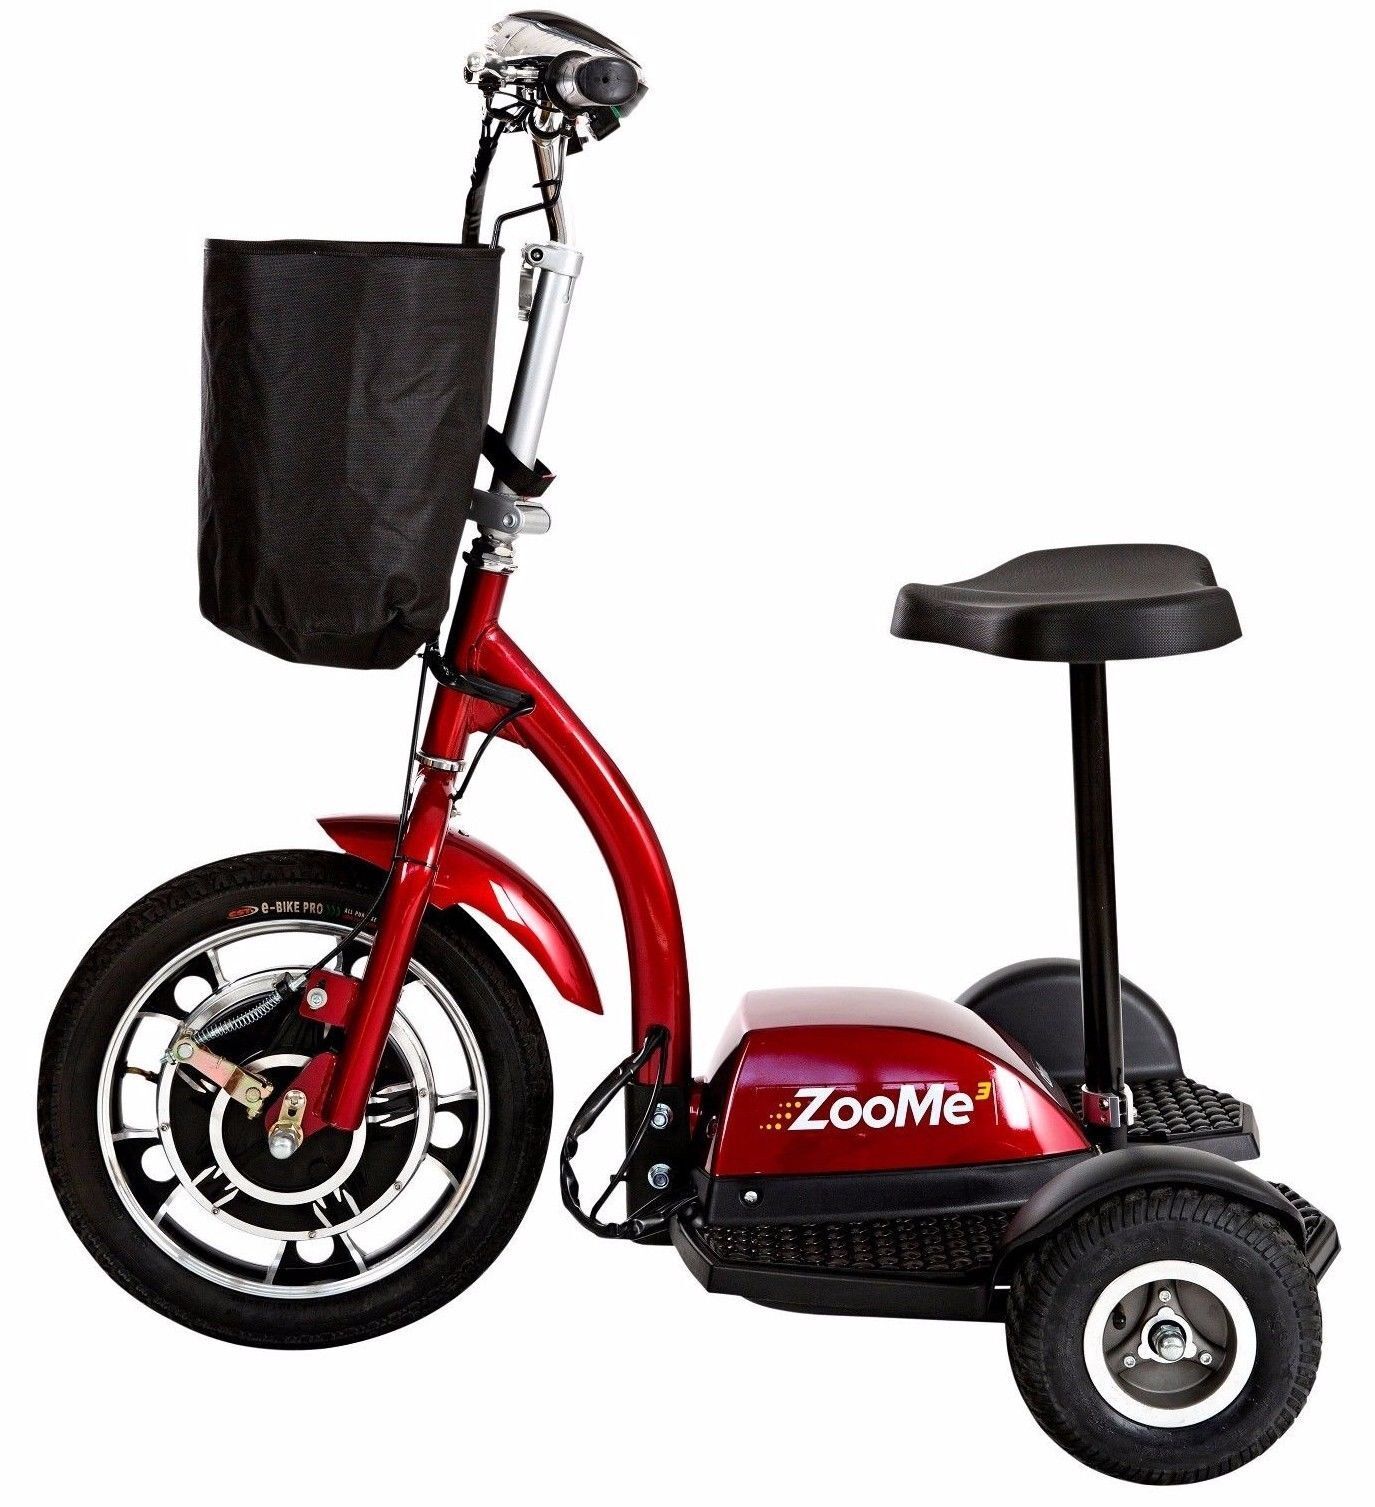 NEW SCOOTER -ZOOME3-Drive Medical Three Wheel Recreational Power Scooter, Red